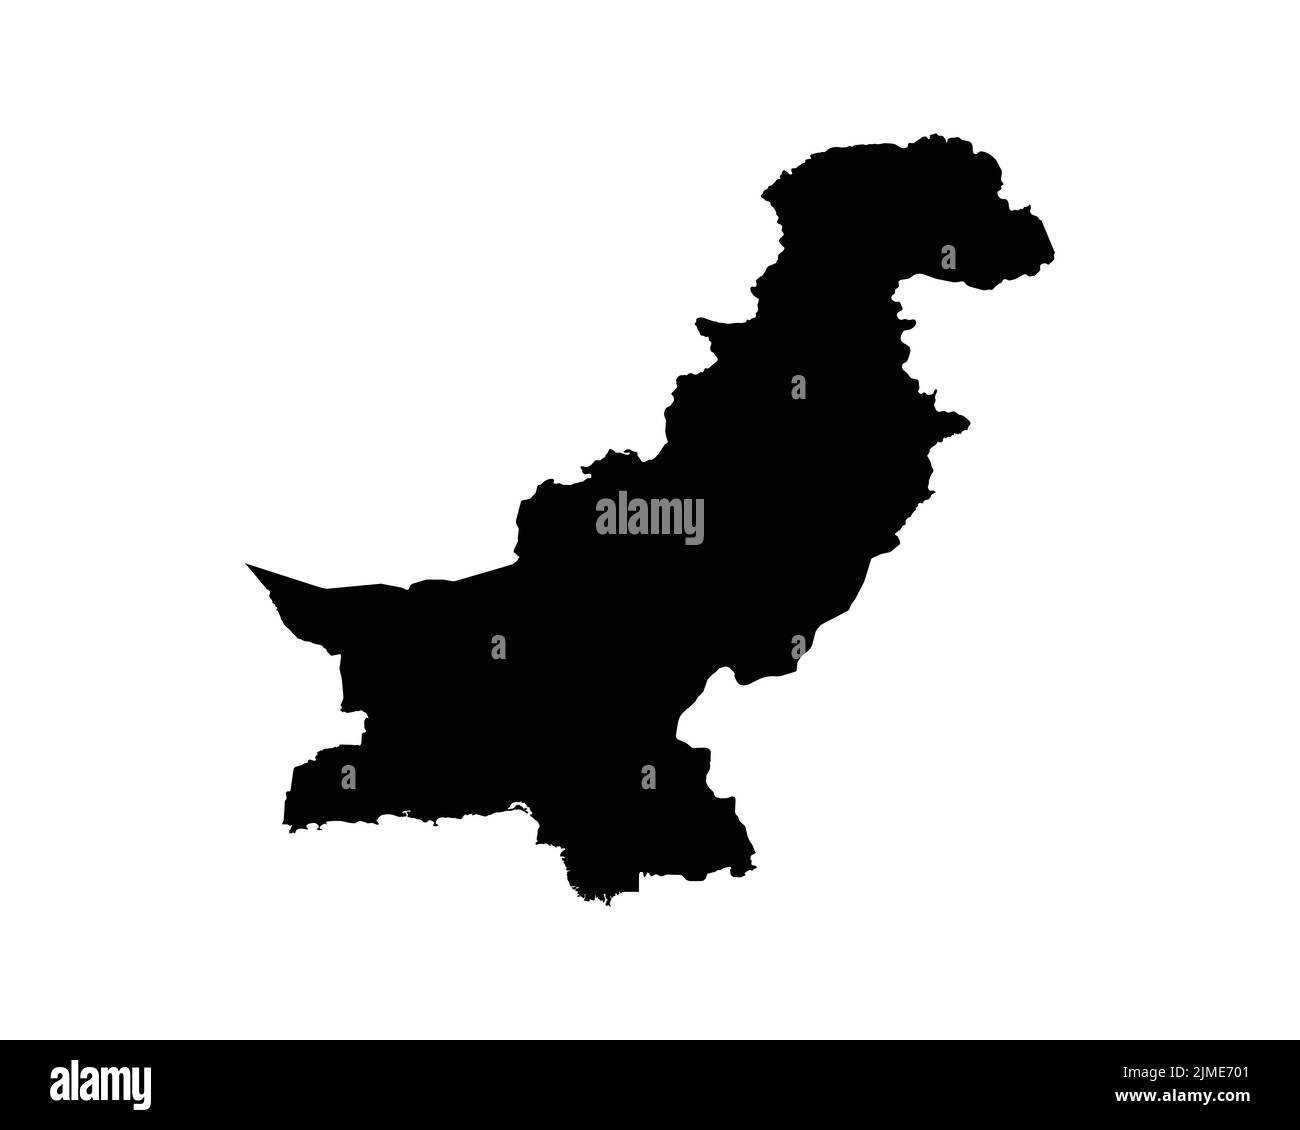 Pakistan Map. Pakistani Country Map. Black and White National Nation Geography Outline Border Boundary Territory Shape Vector Illustration EPS Clipart Stock Vector